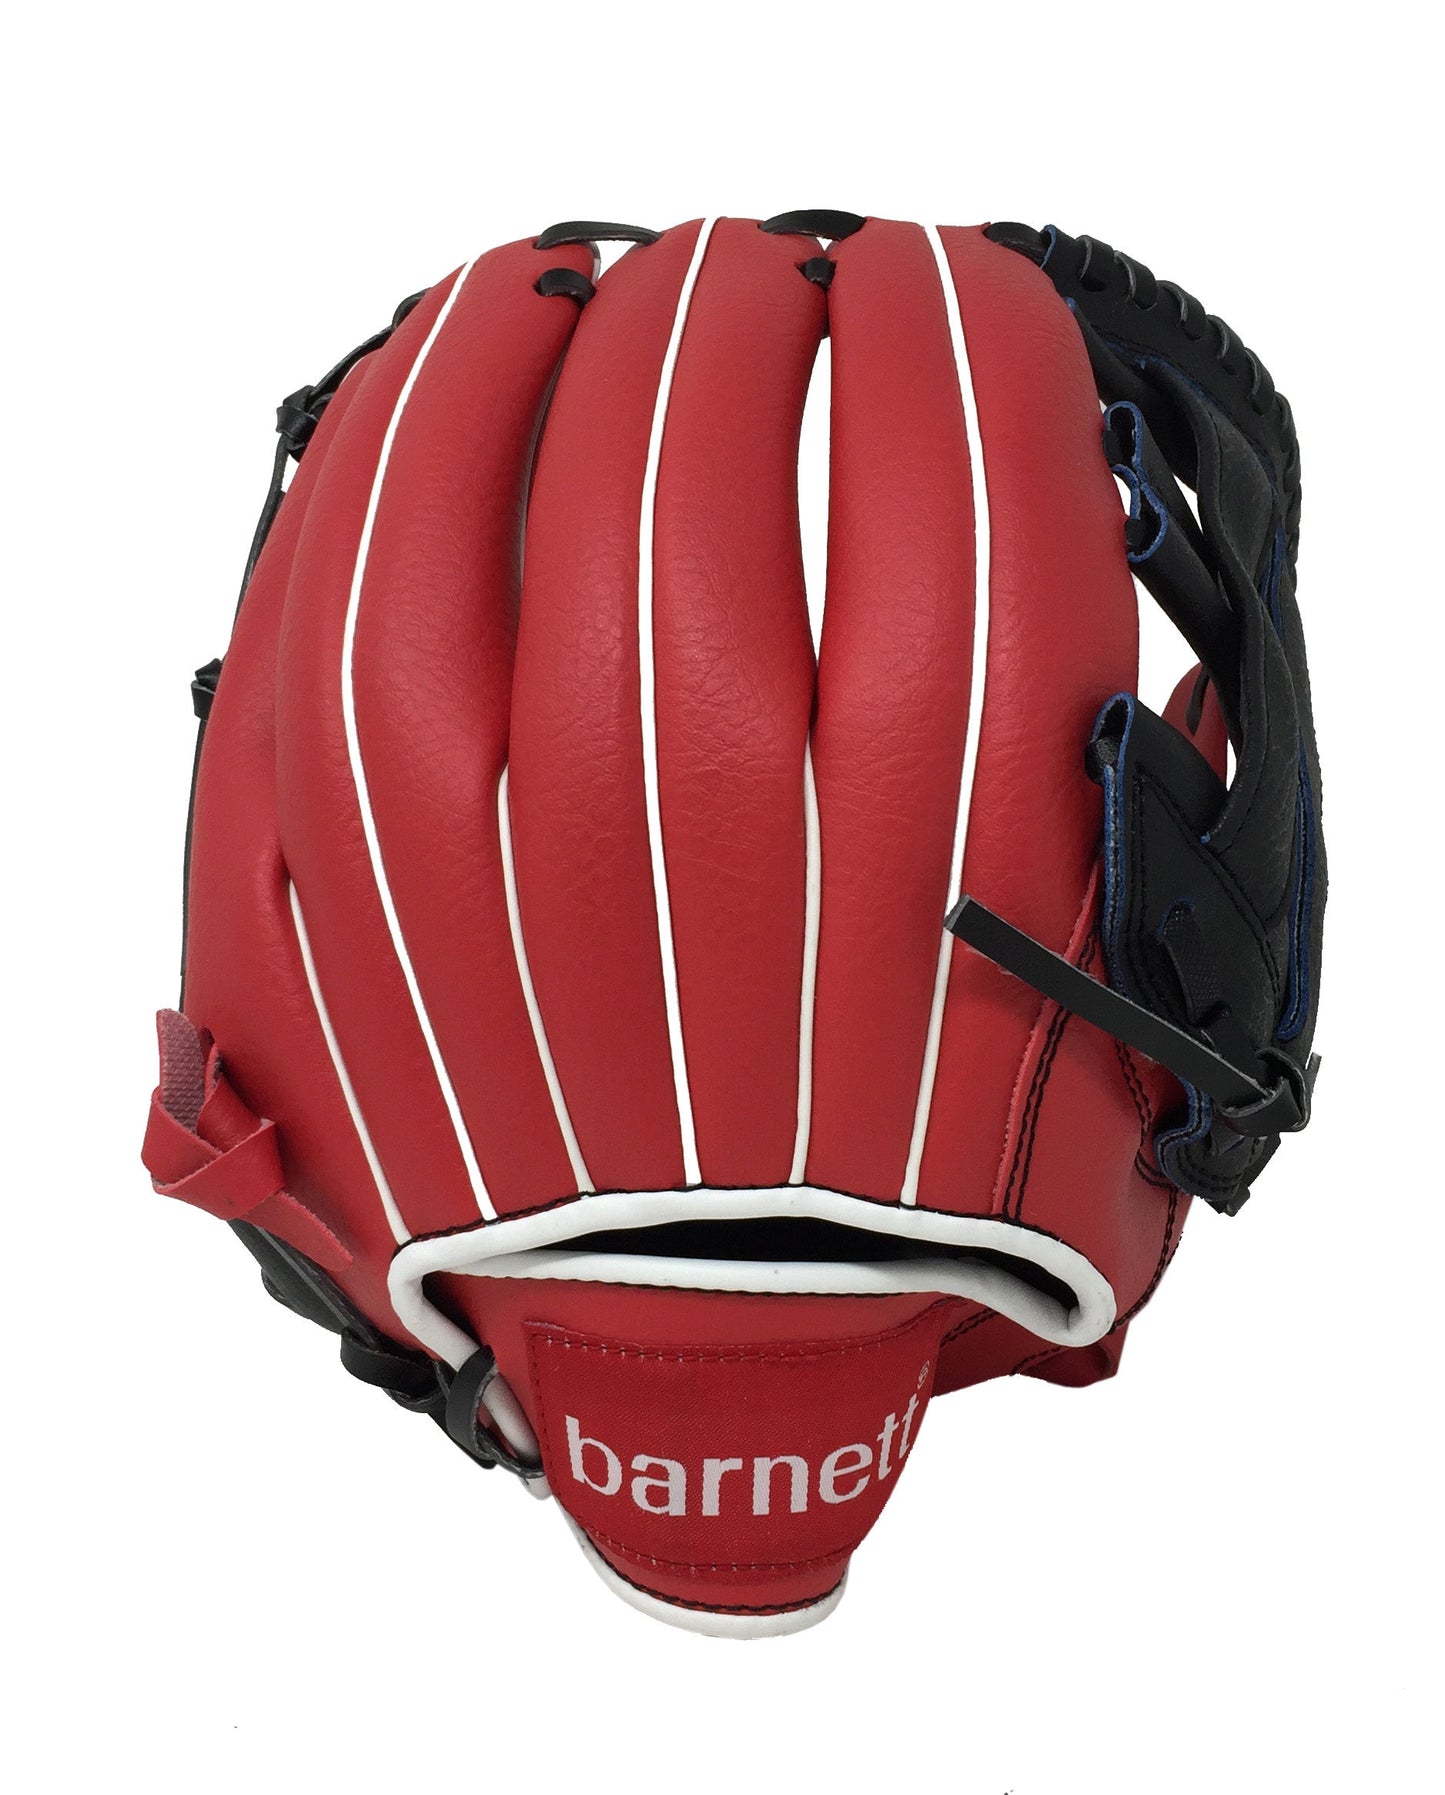 JL-120 - baseball glove, outfield, polyurethane, size 12.5" red